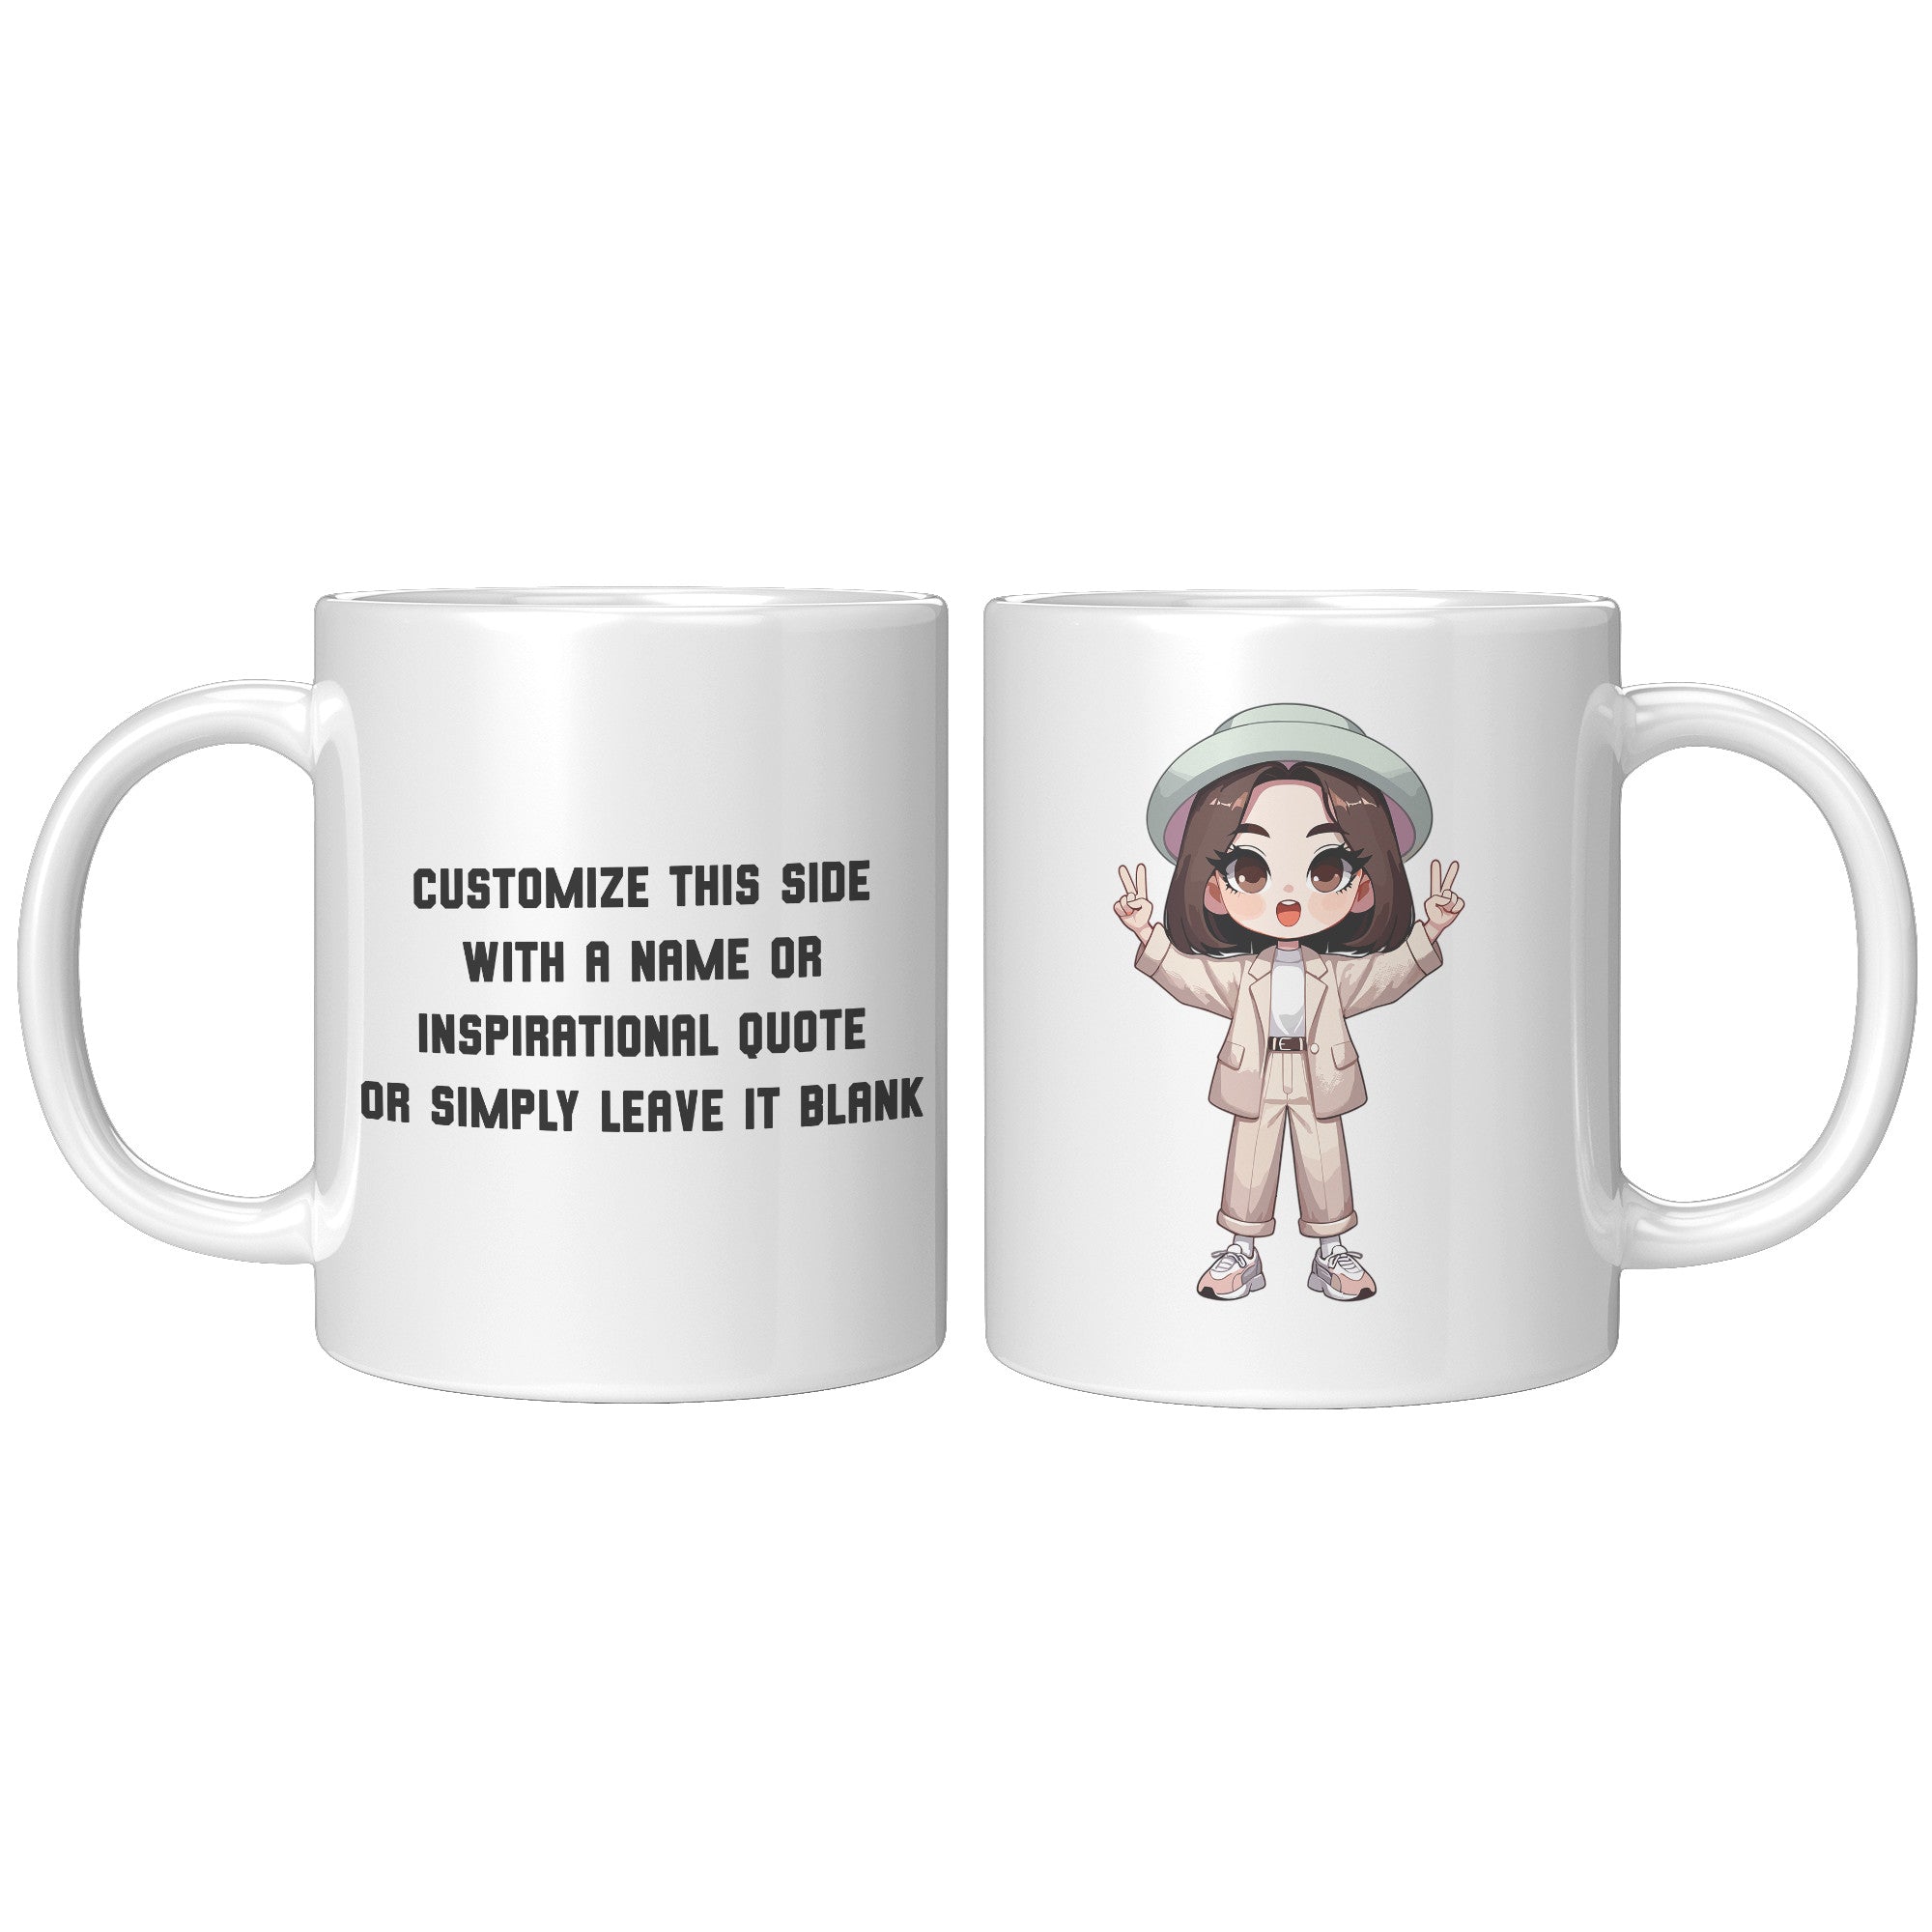 "Female Runner Coffee Mug - Inspirational Running Quotes Cup - Perfect Gift for Women Runners - Motivational Marathoner's Morning Brew" - O